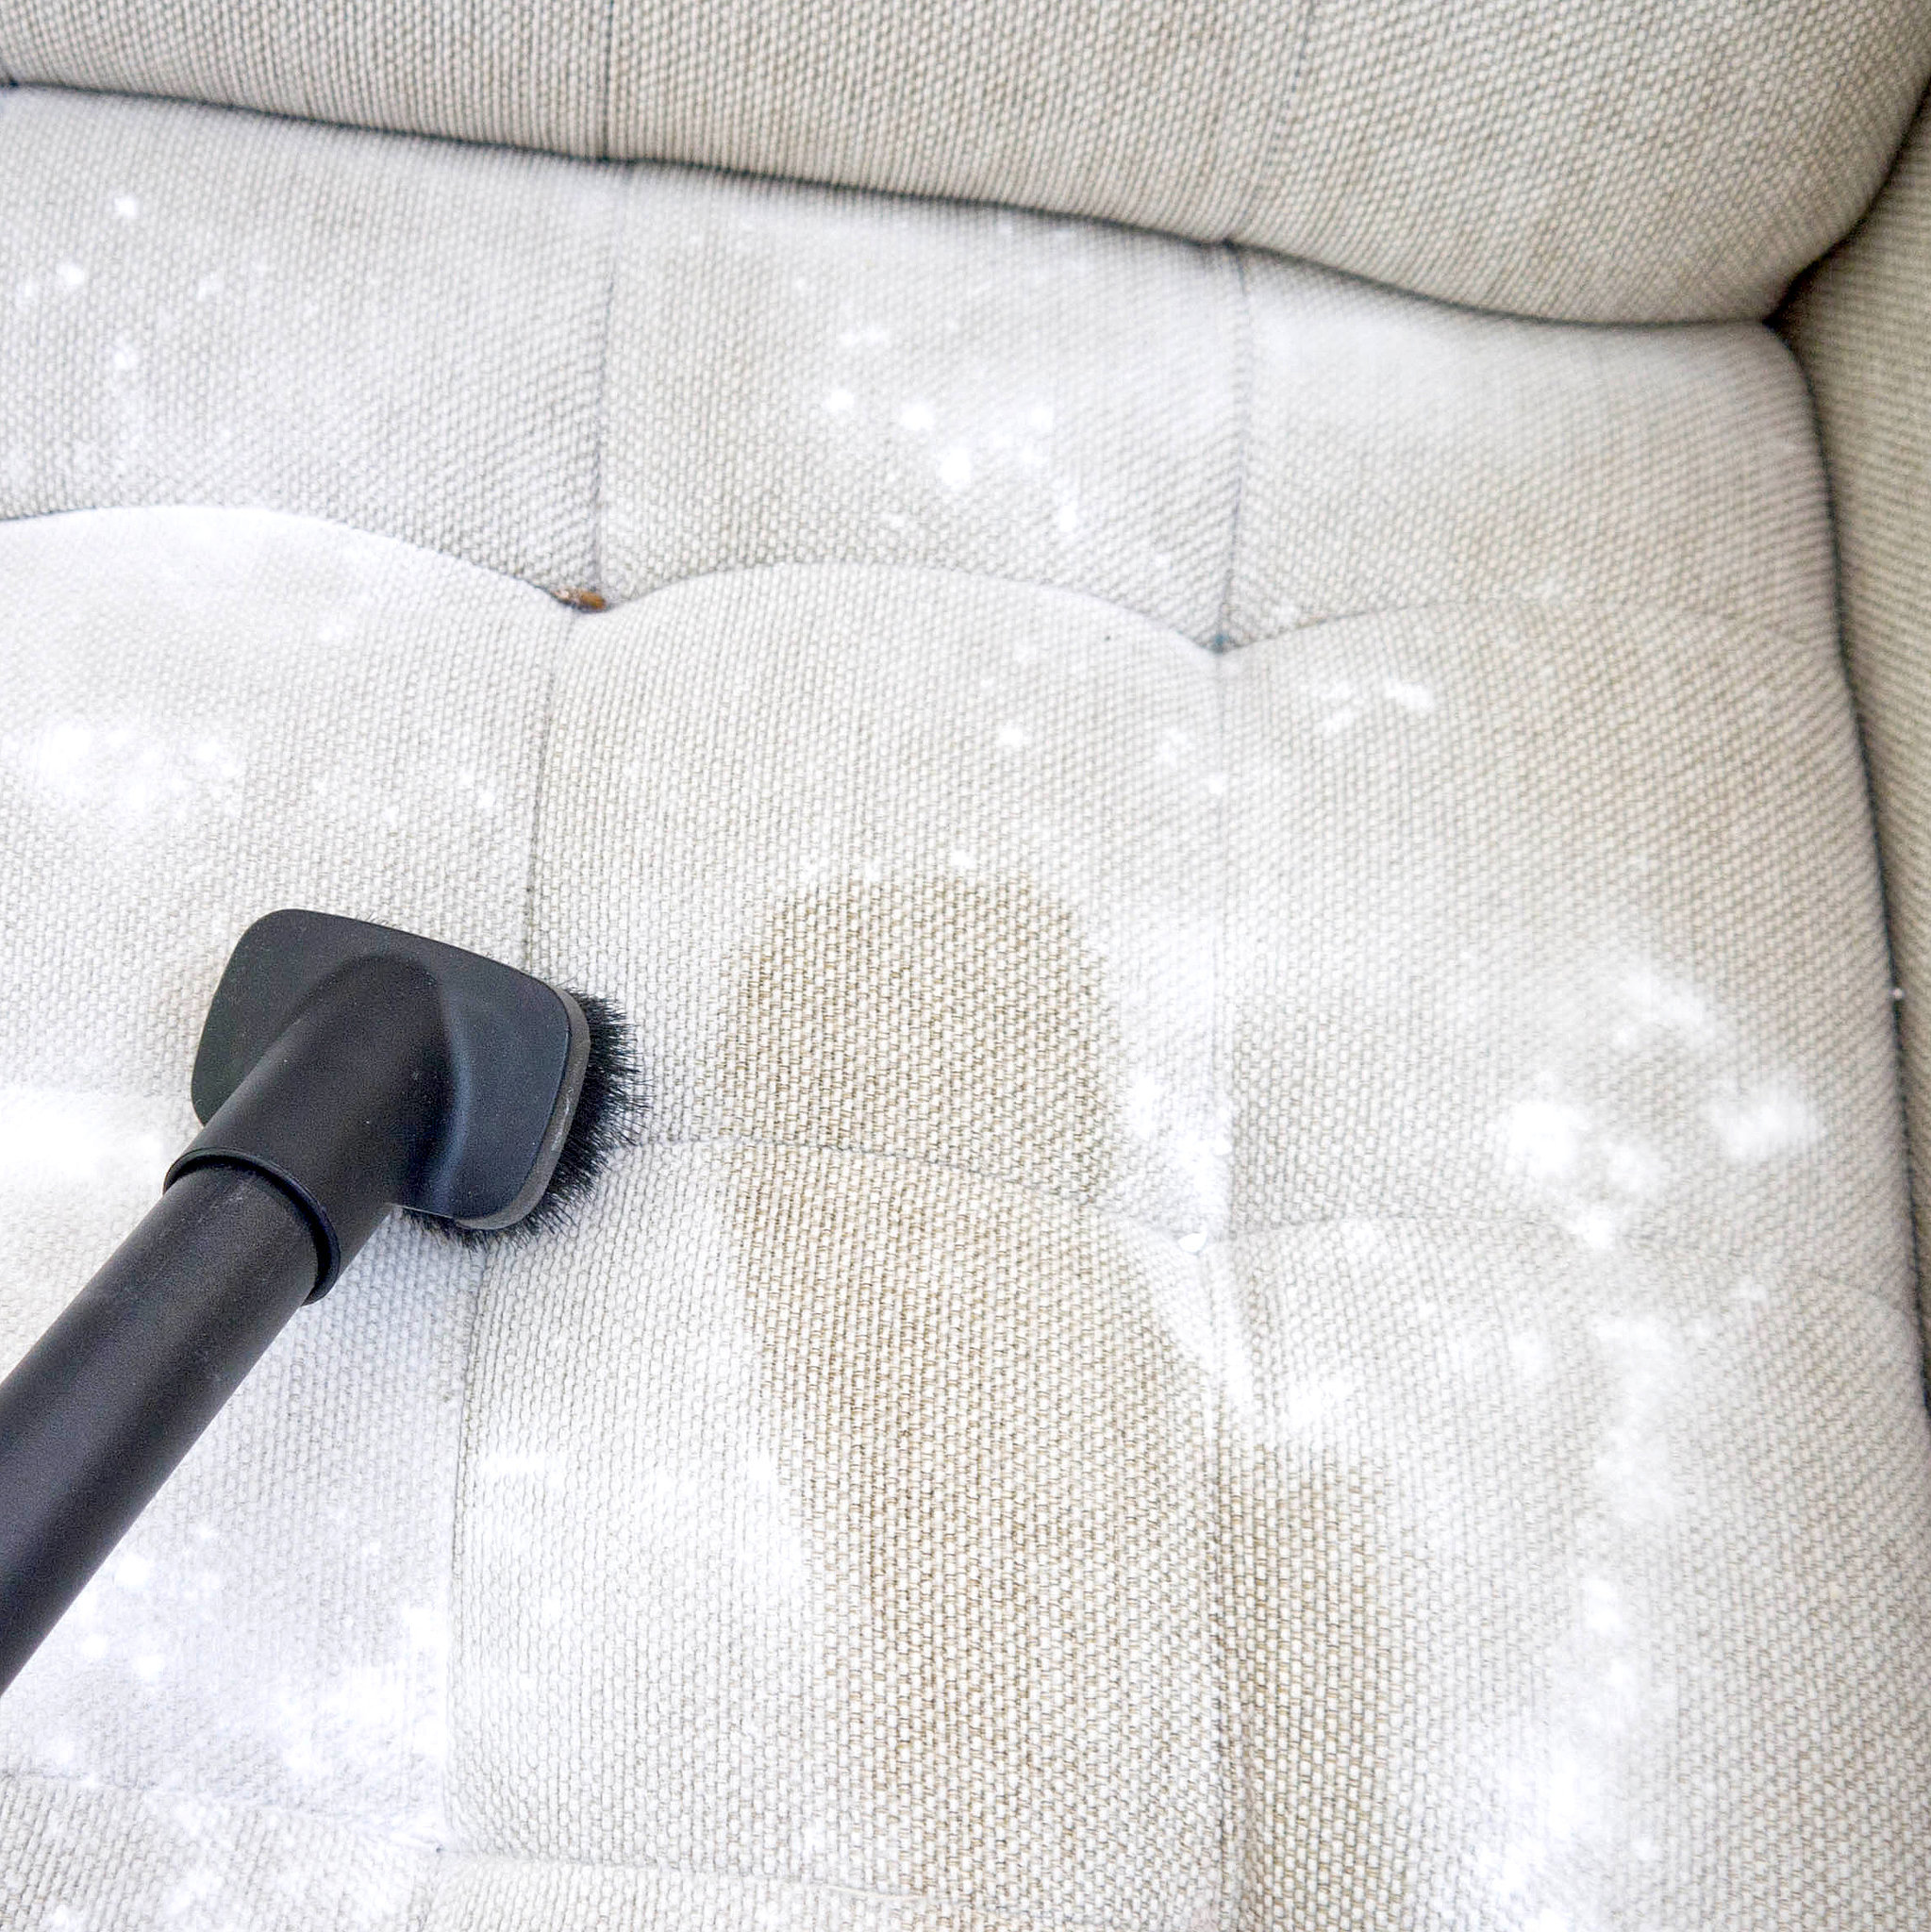 Deep Clean Your Fabric Couch | 25+ Cleaning Hacks